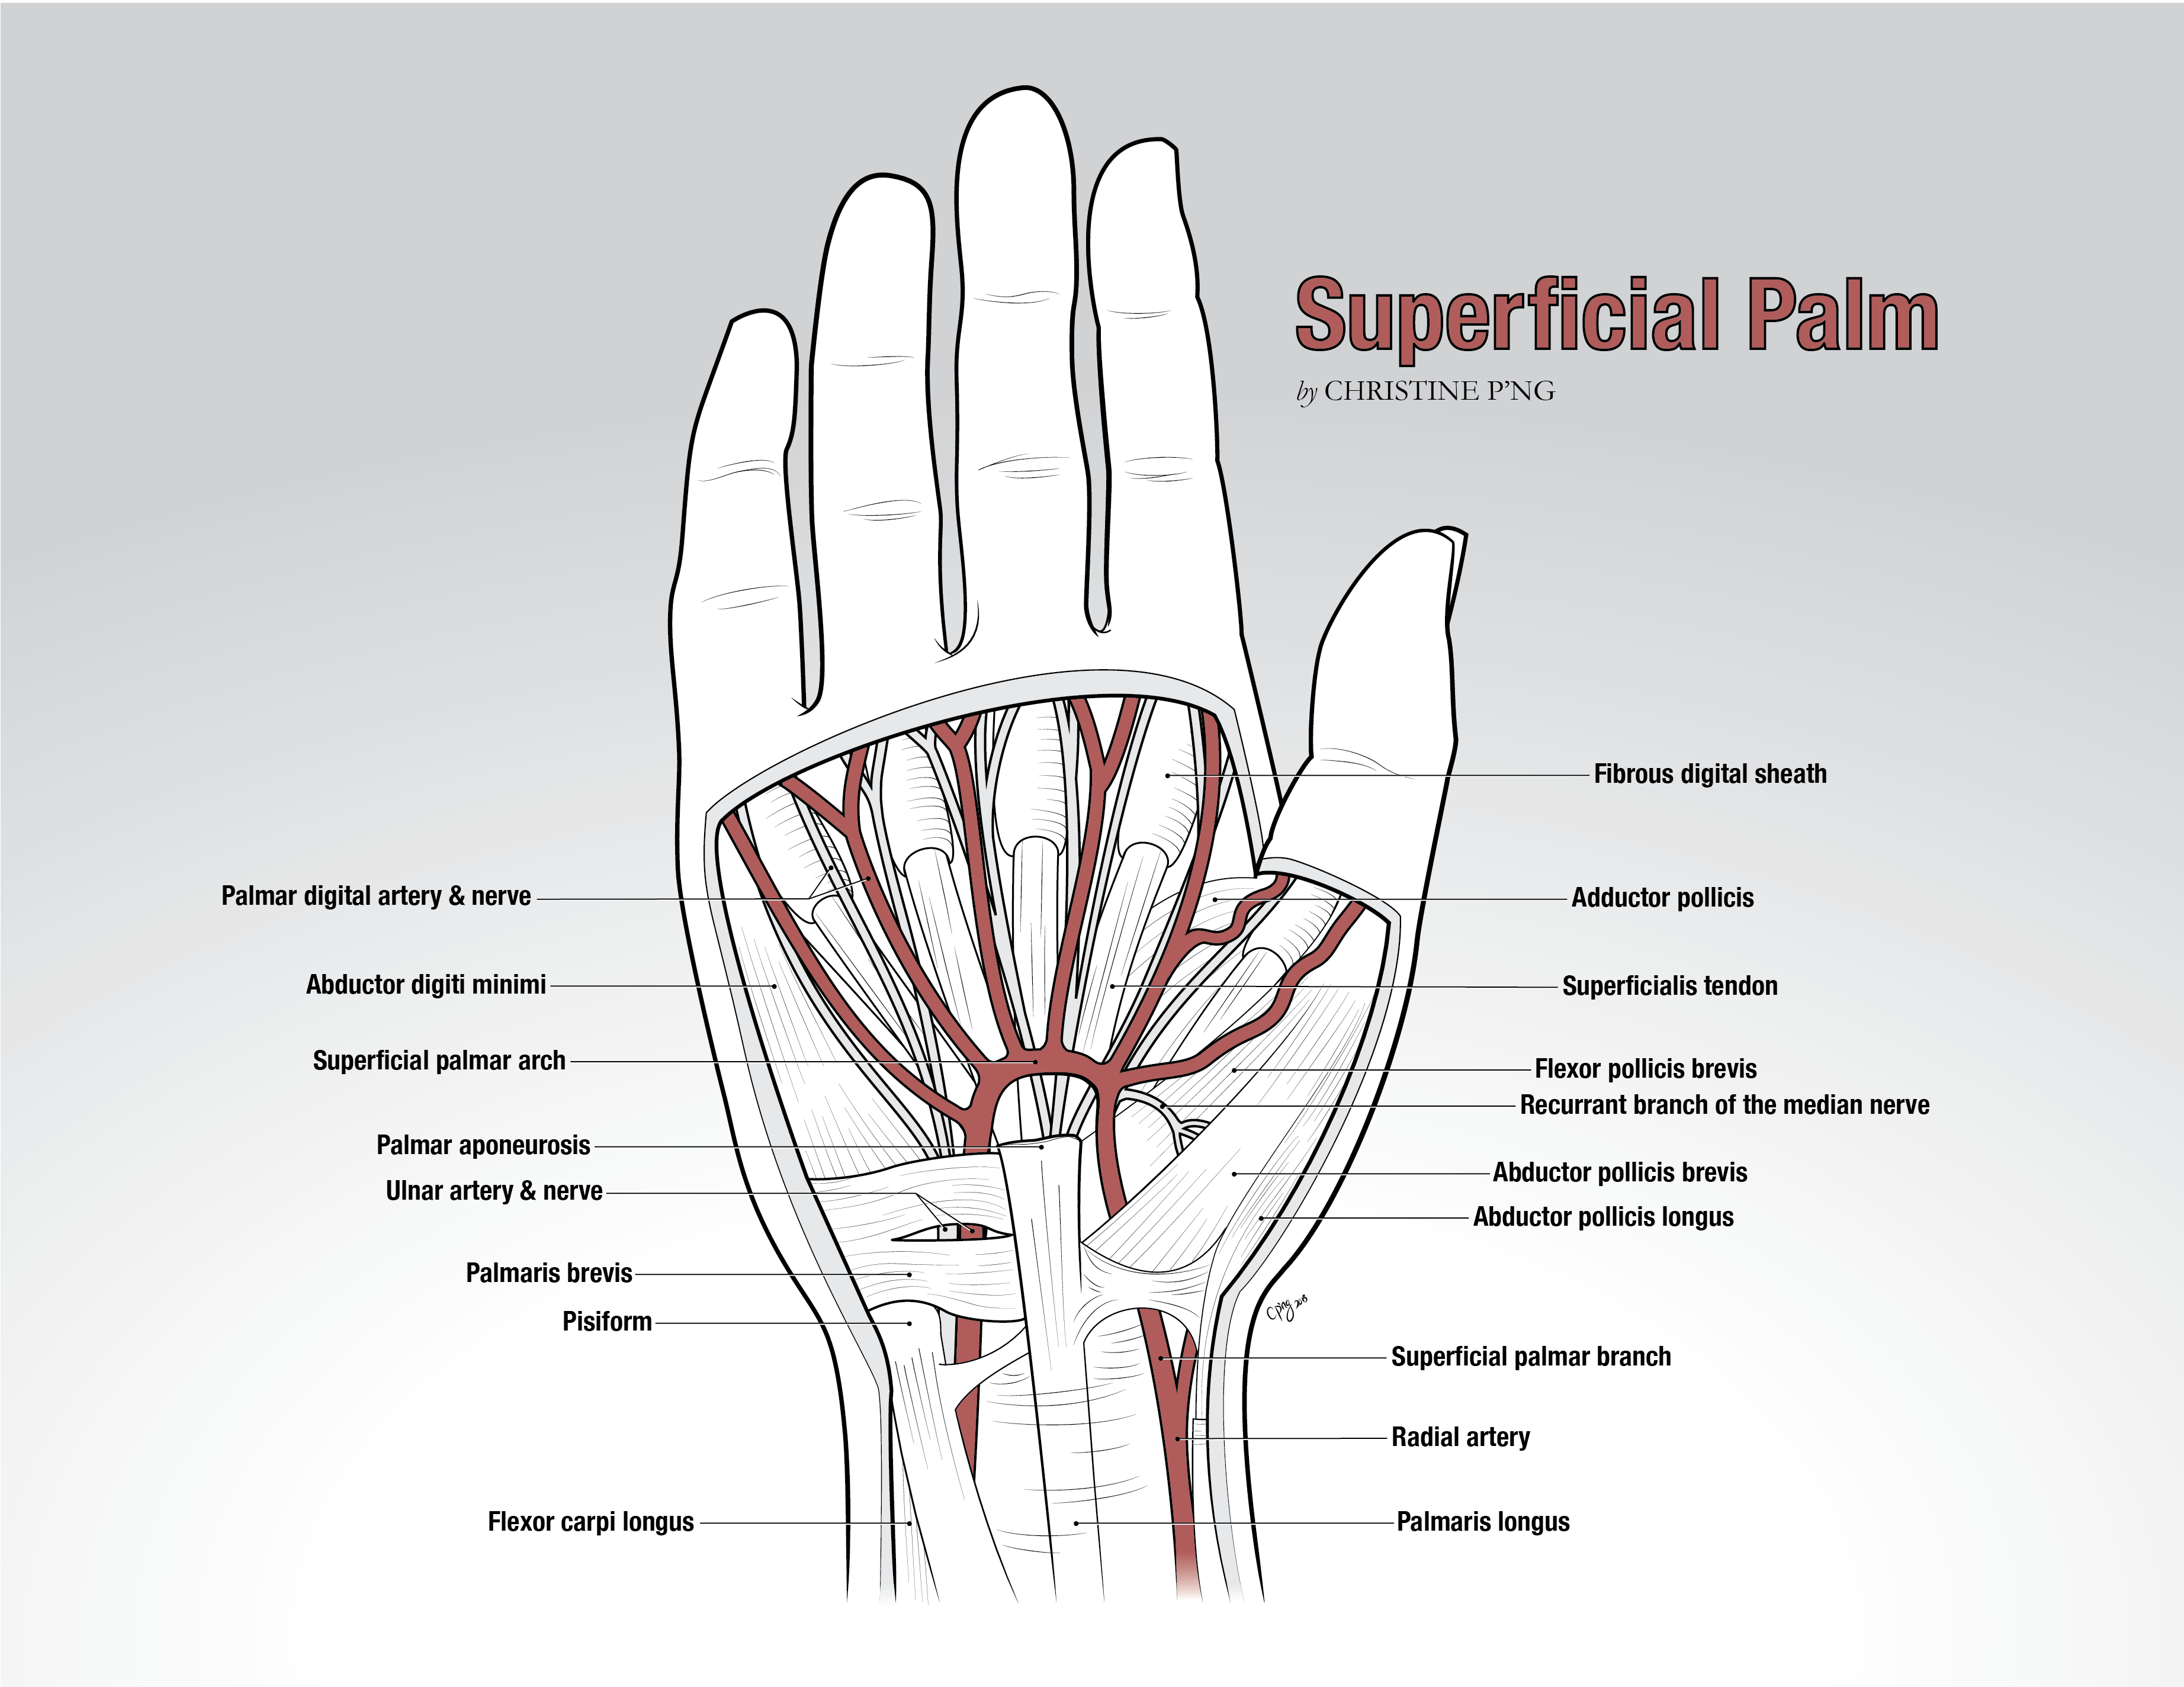 Line drawing of the superficial palm